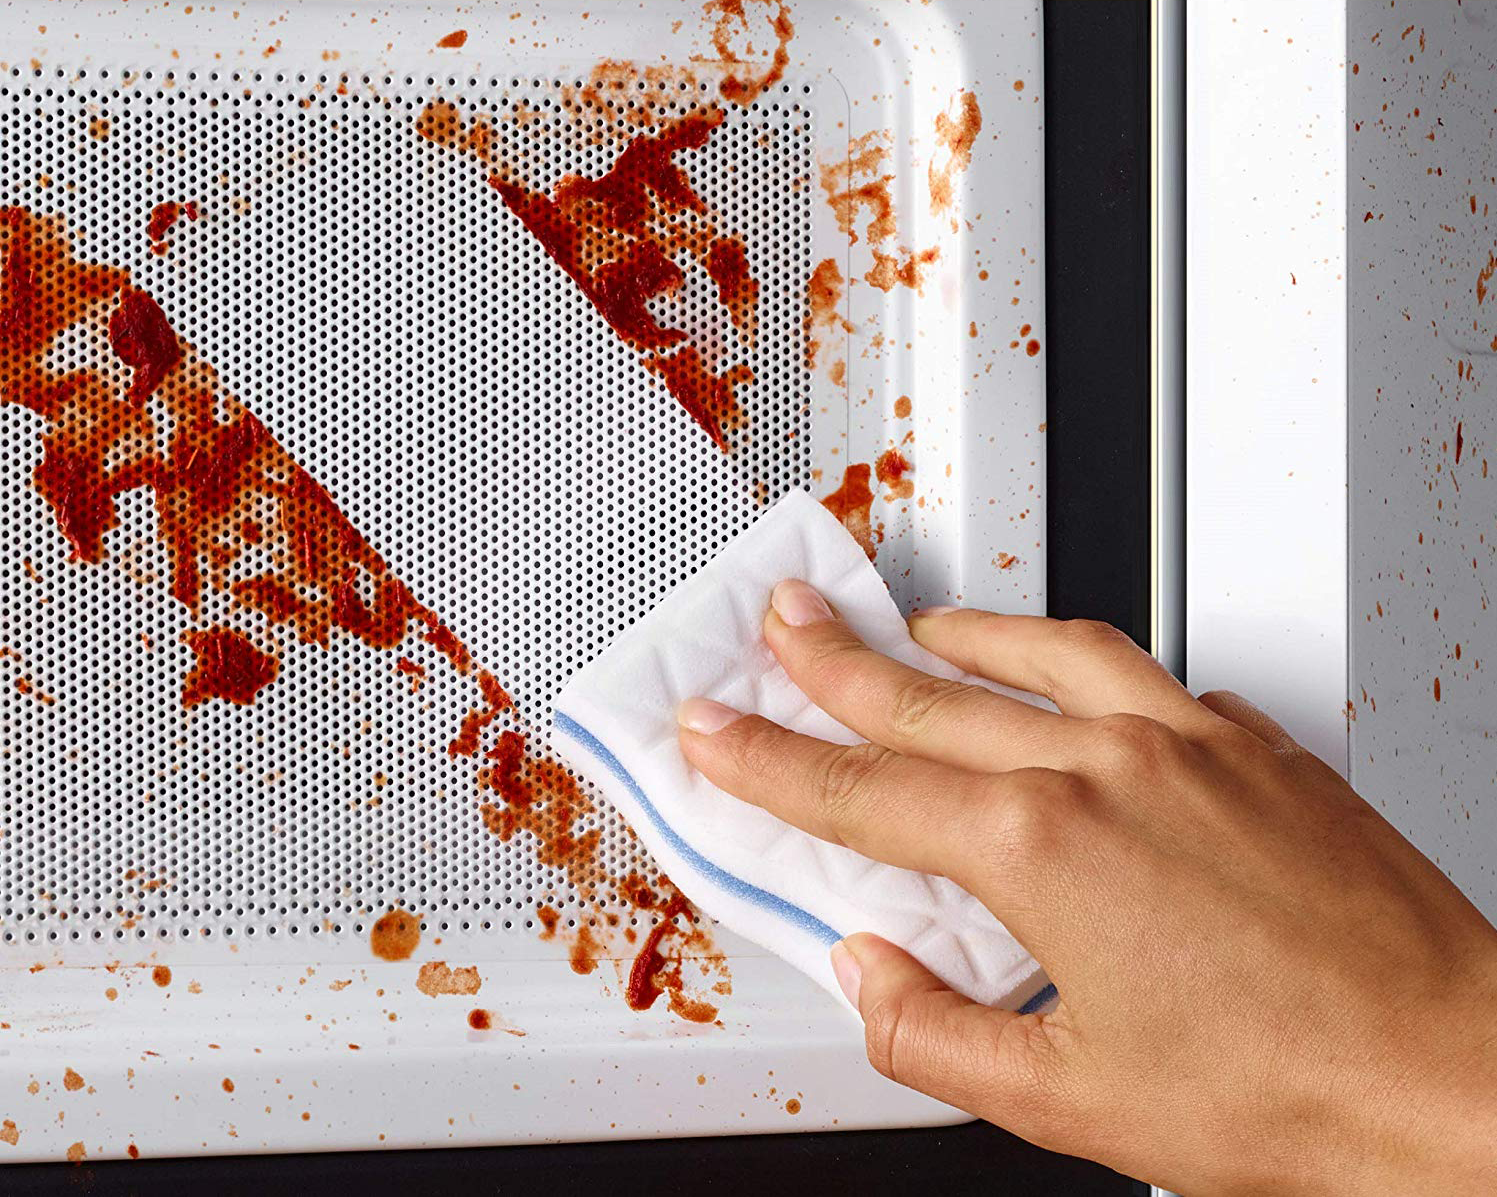 Hand wiping tomato sauce off microwave 